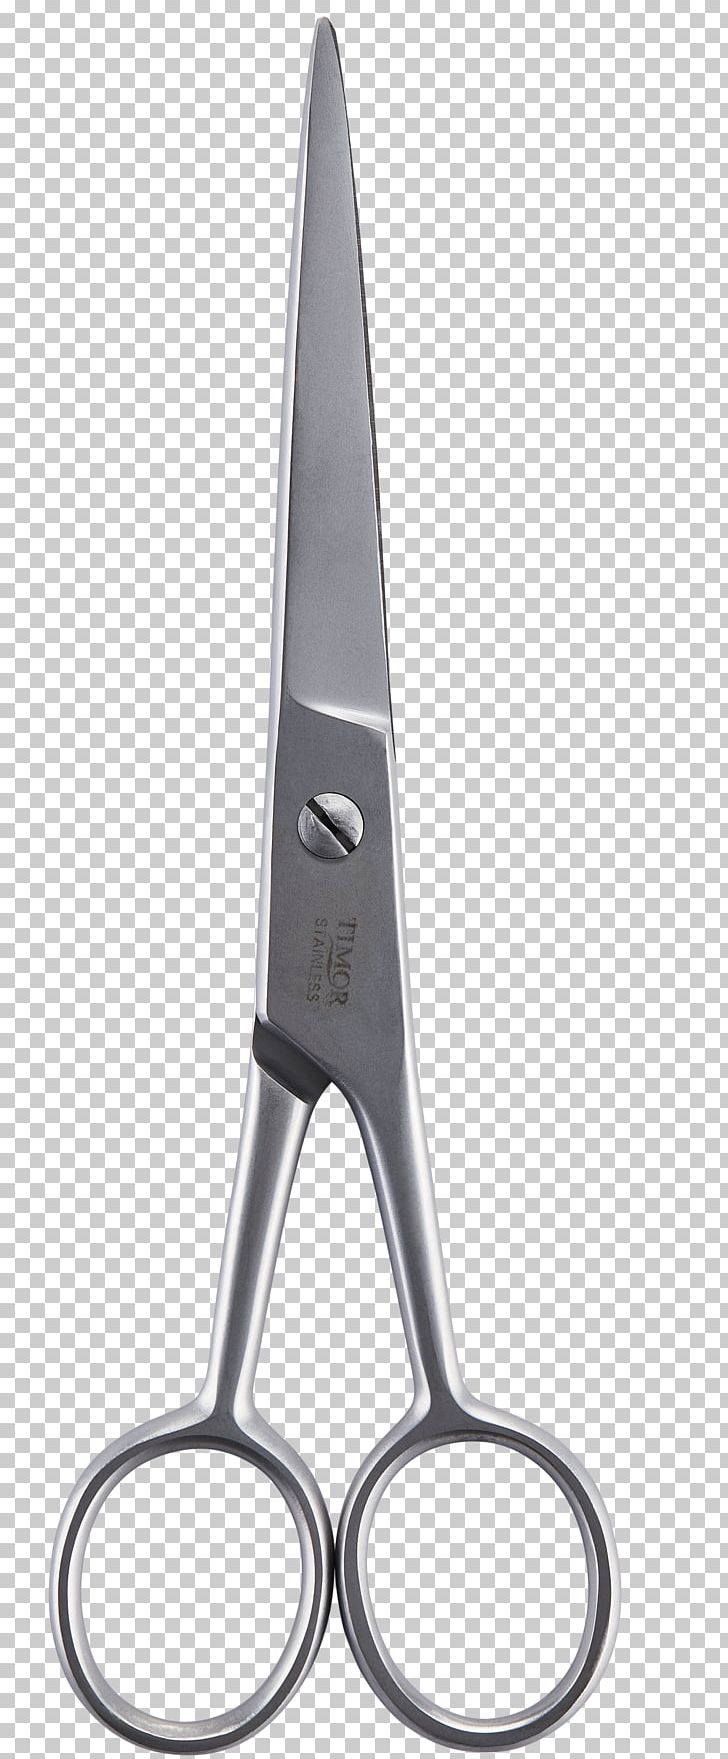 Scissors Cabelo Hairdresser Hair-cutting Shears PNG, Clipart, Beard, Cabelo, Cosmetics, Hair, Hairbrush Free PNG Download